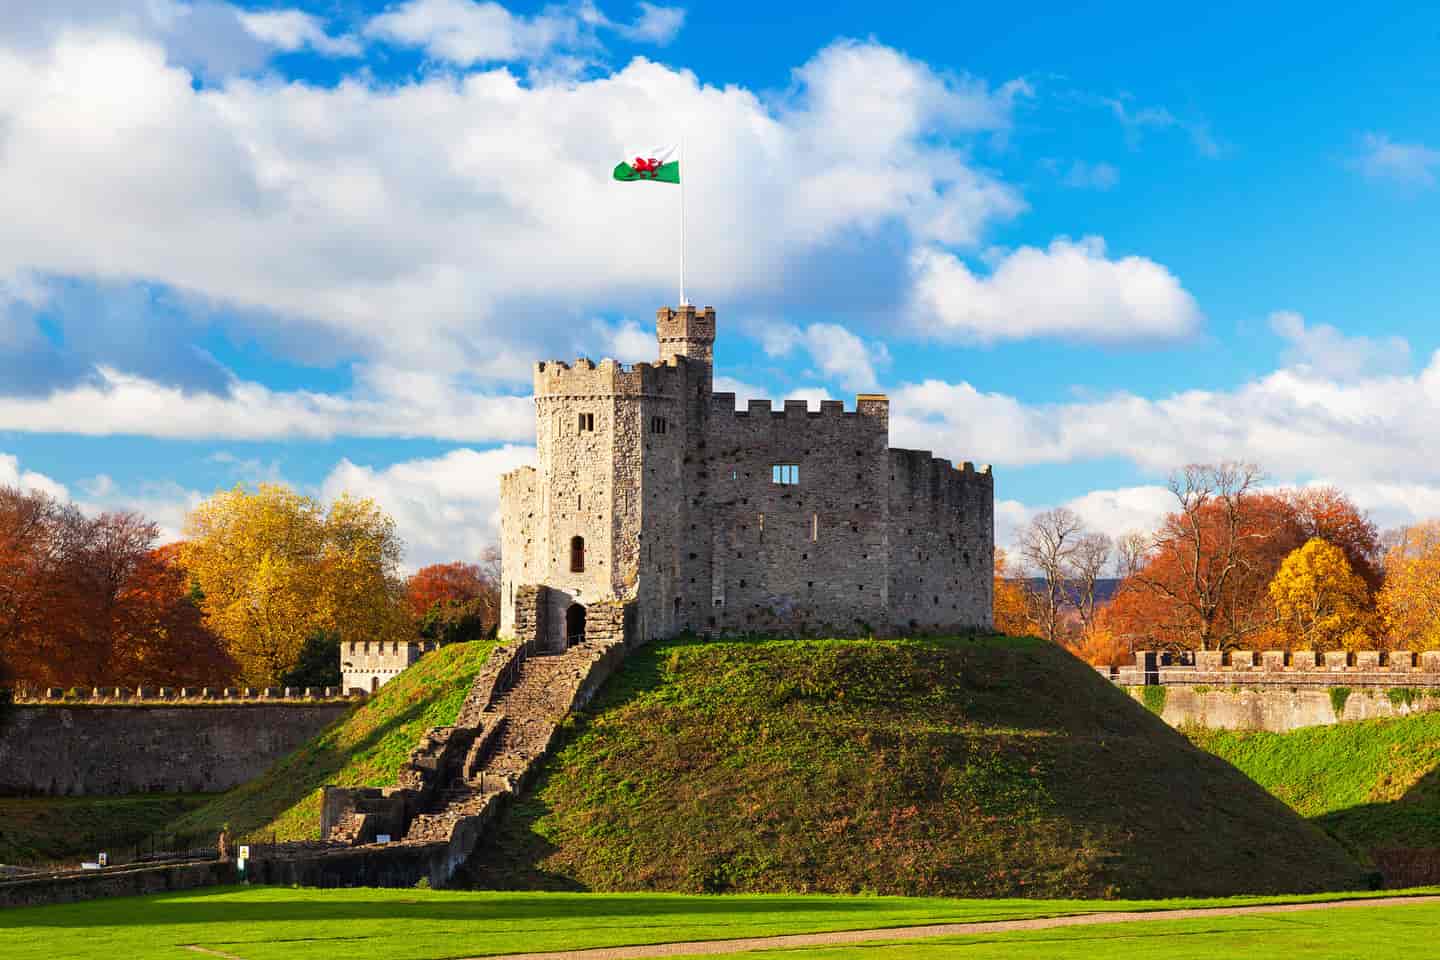 Student Accommodation in Cardiff - Cardiff Castle on a sunny day